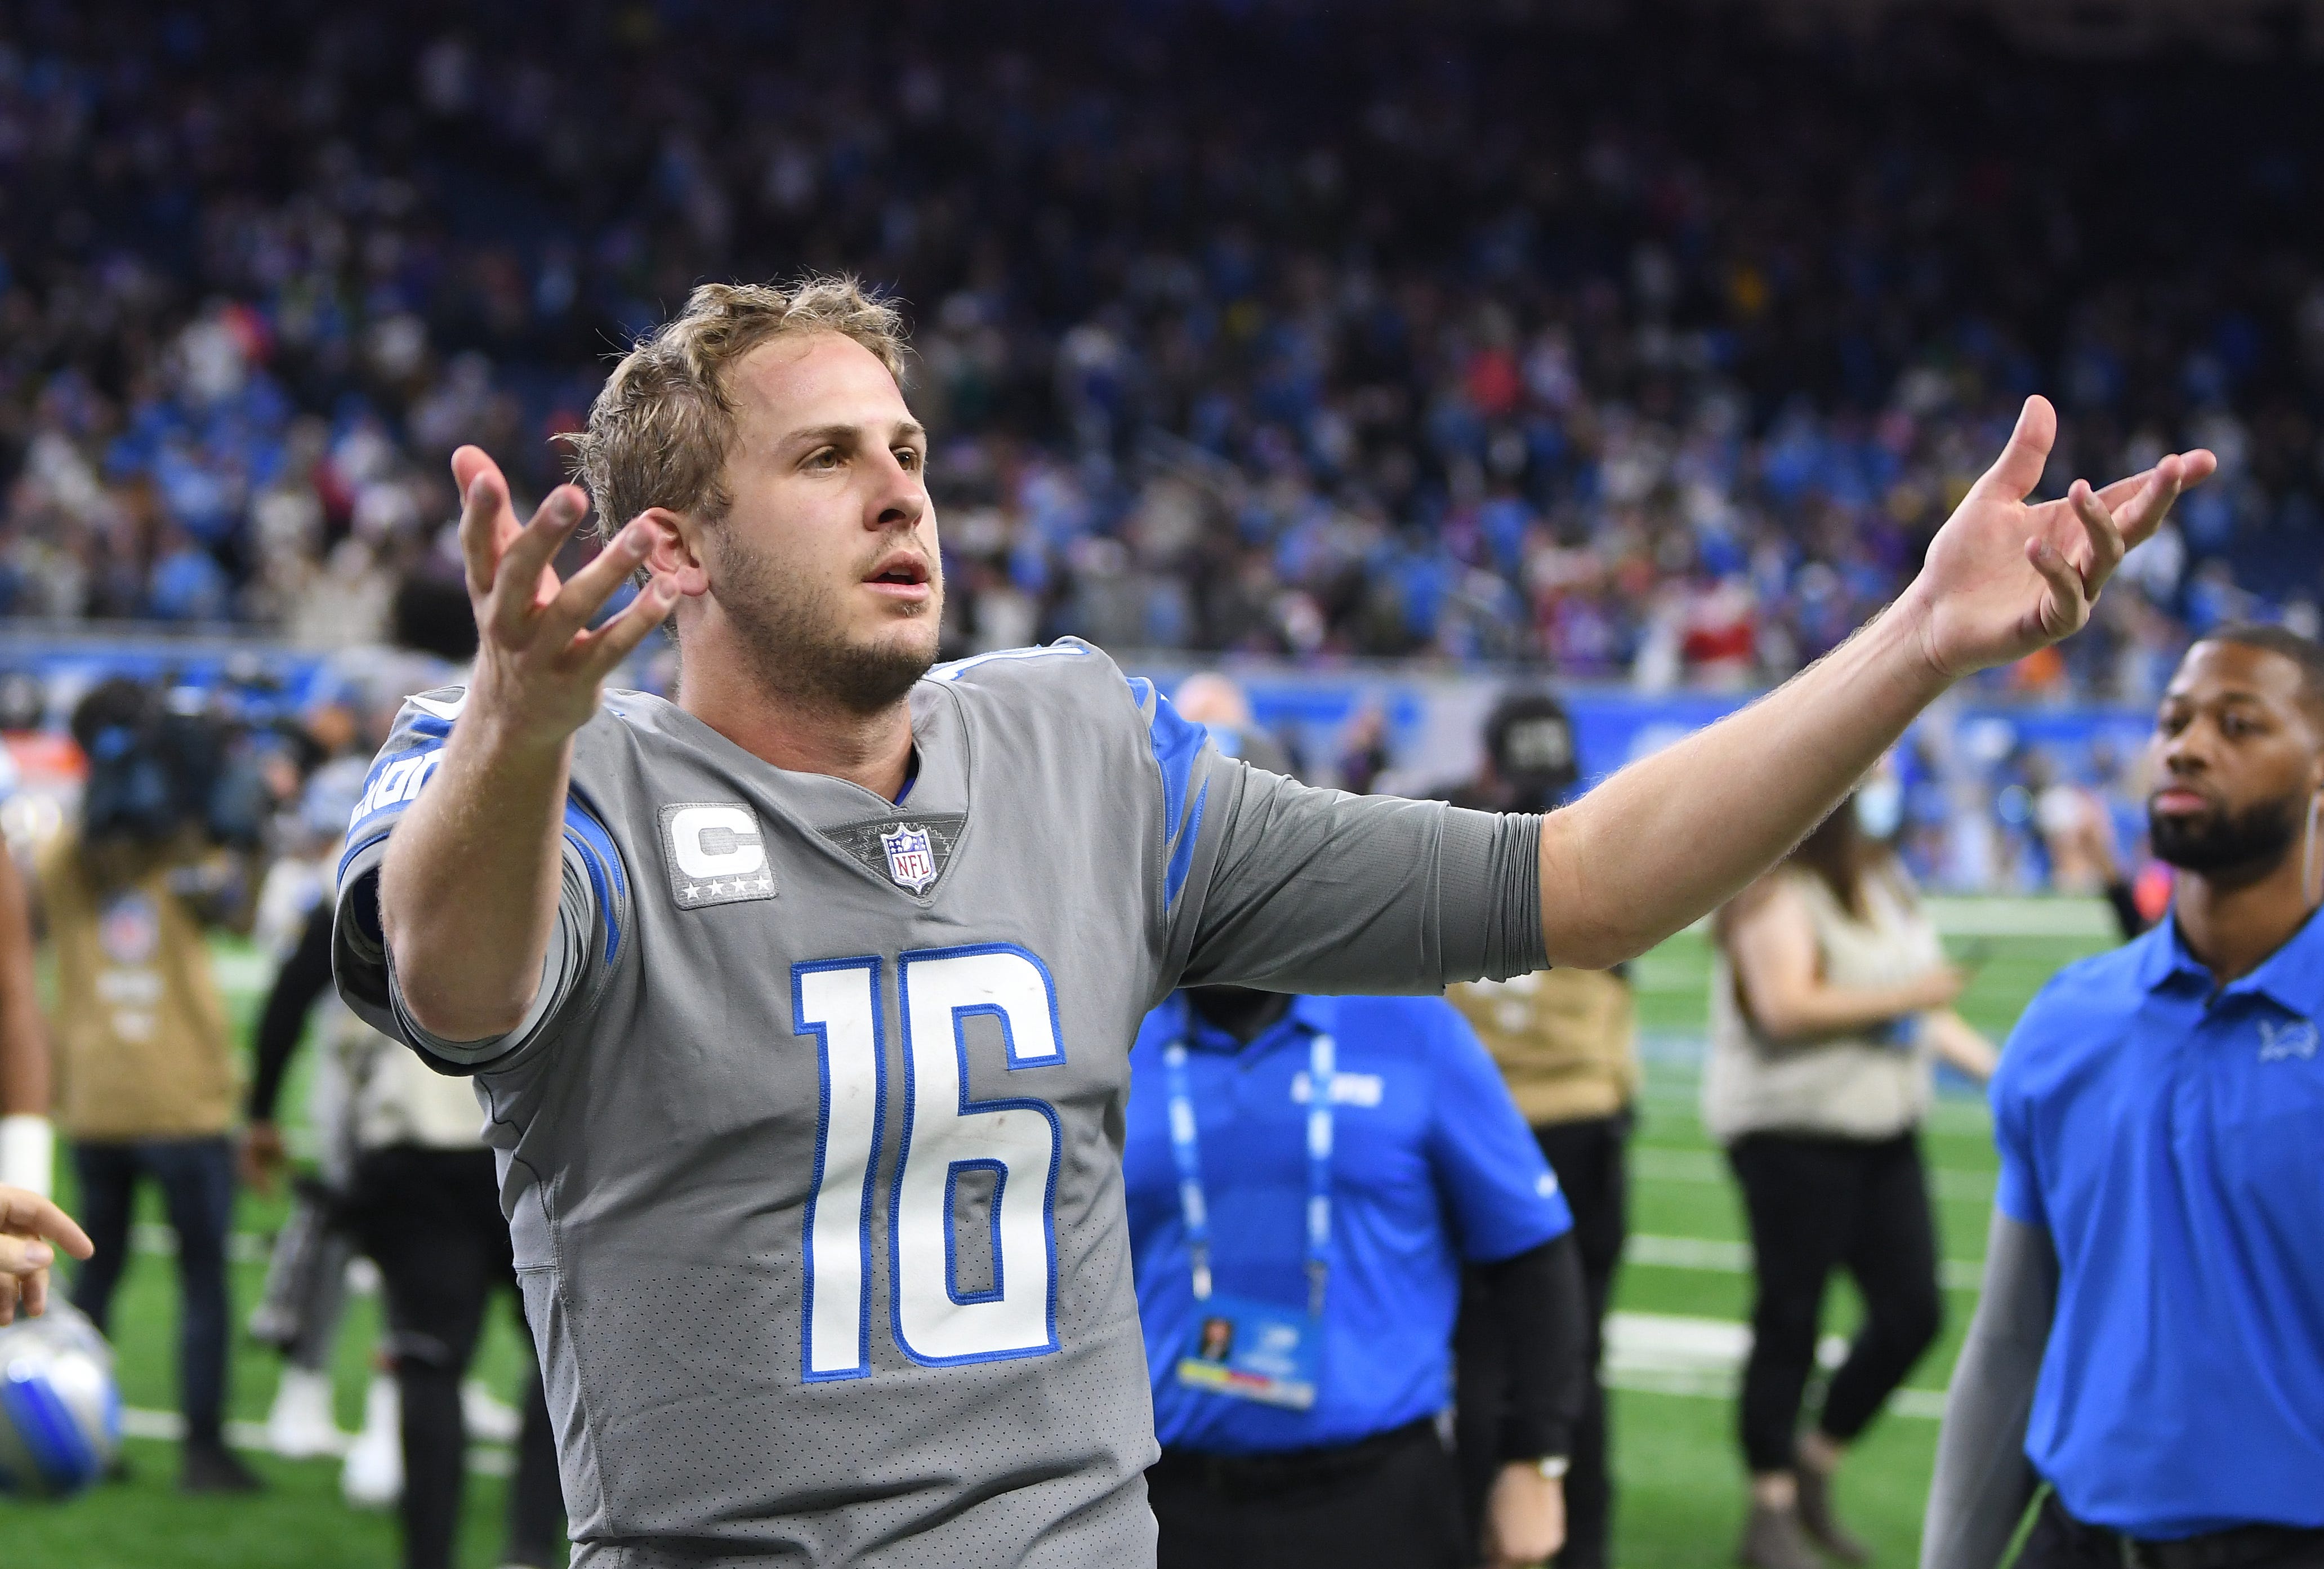 Lions quarterback Jared Goff leaves the field to the cheers of fans after throwing the game winning touchdown, with no time left on the clock, for Detroit's first victory of the season.